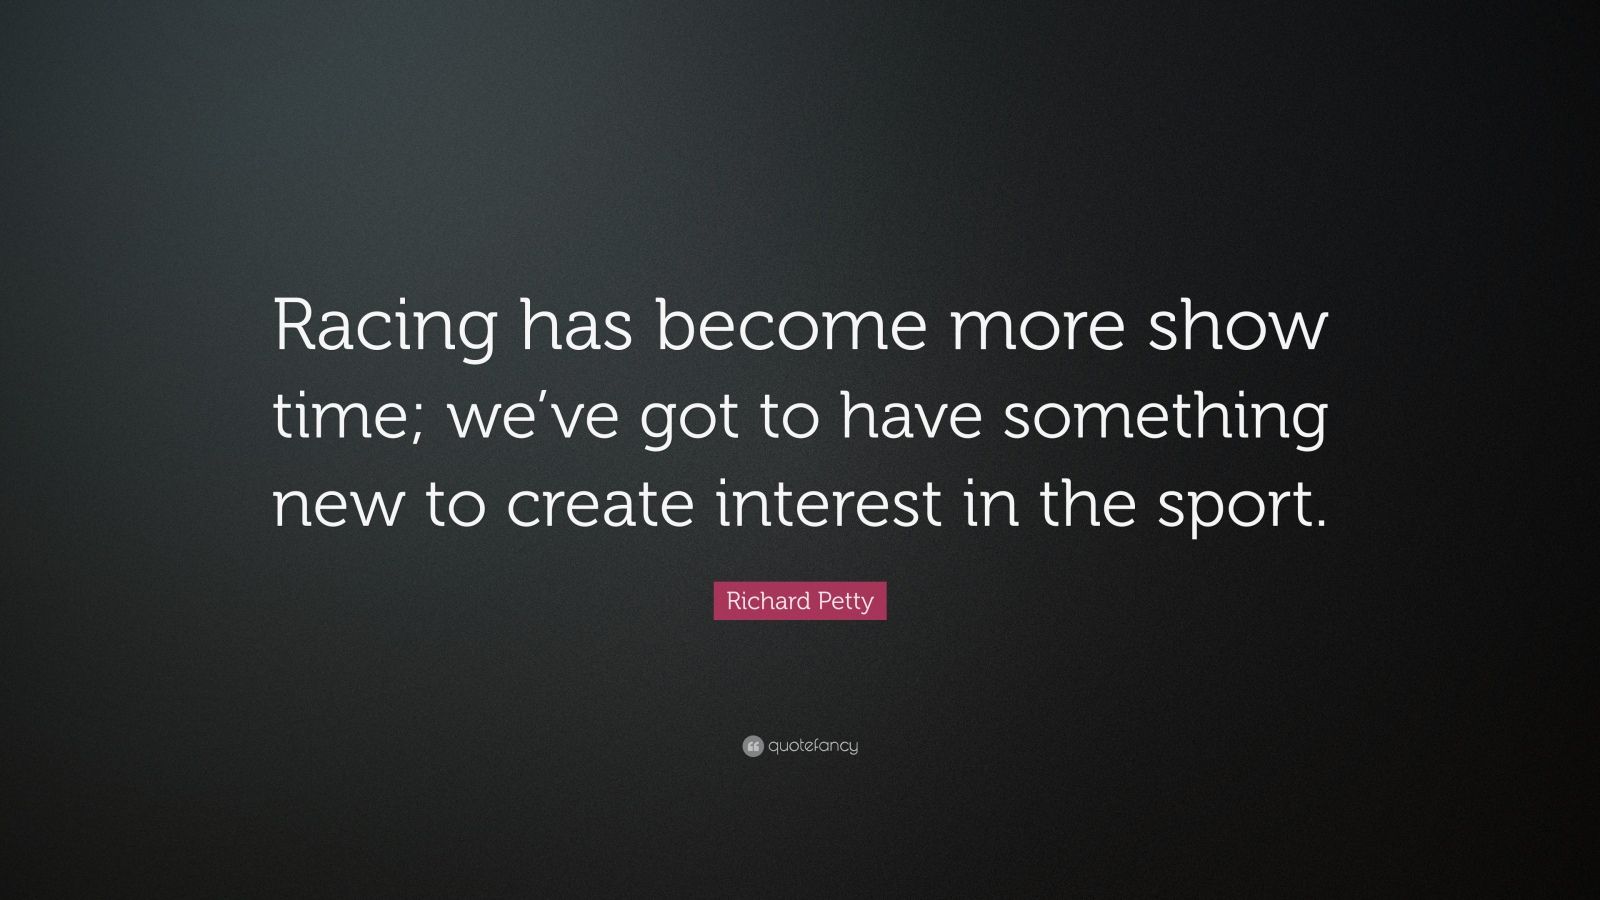 Richard Petty Quotes (18 wallpapers) - Quotefancy